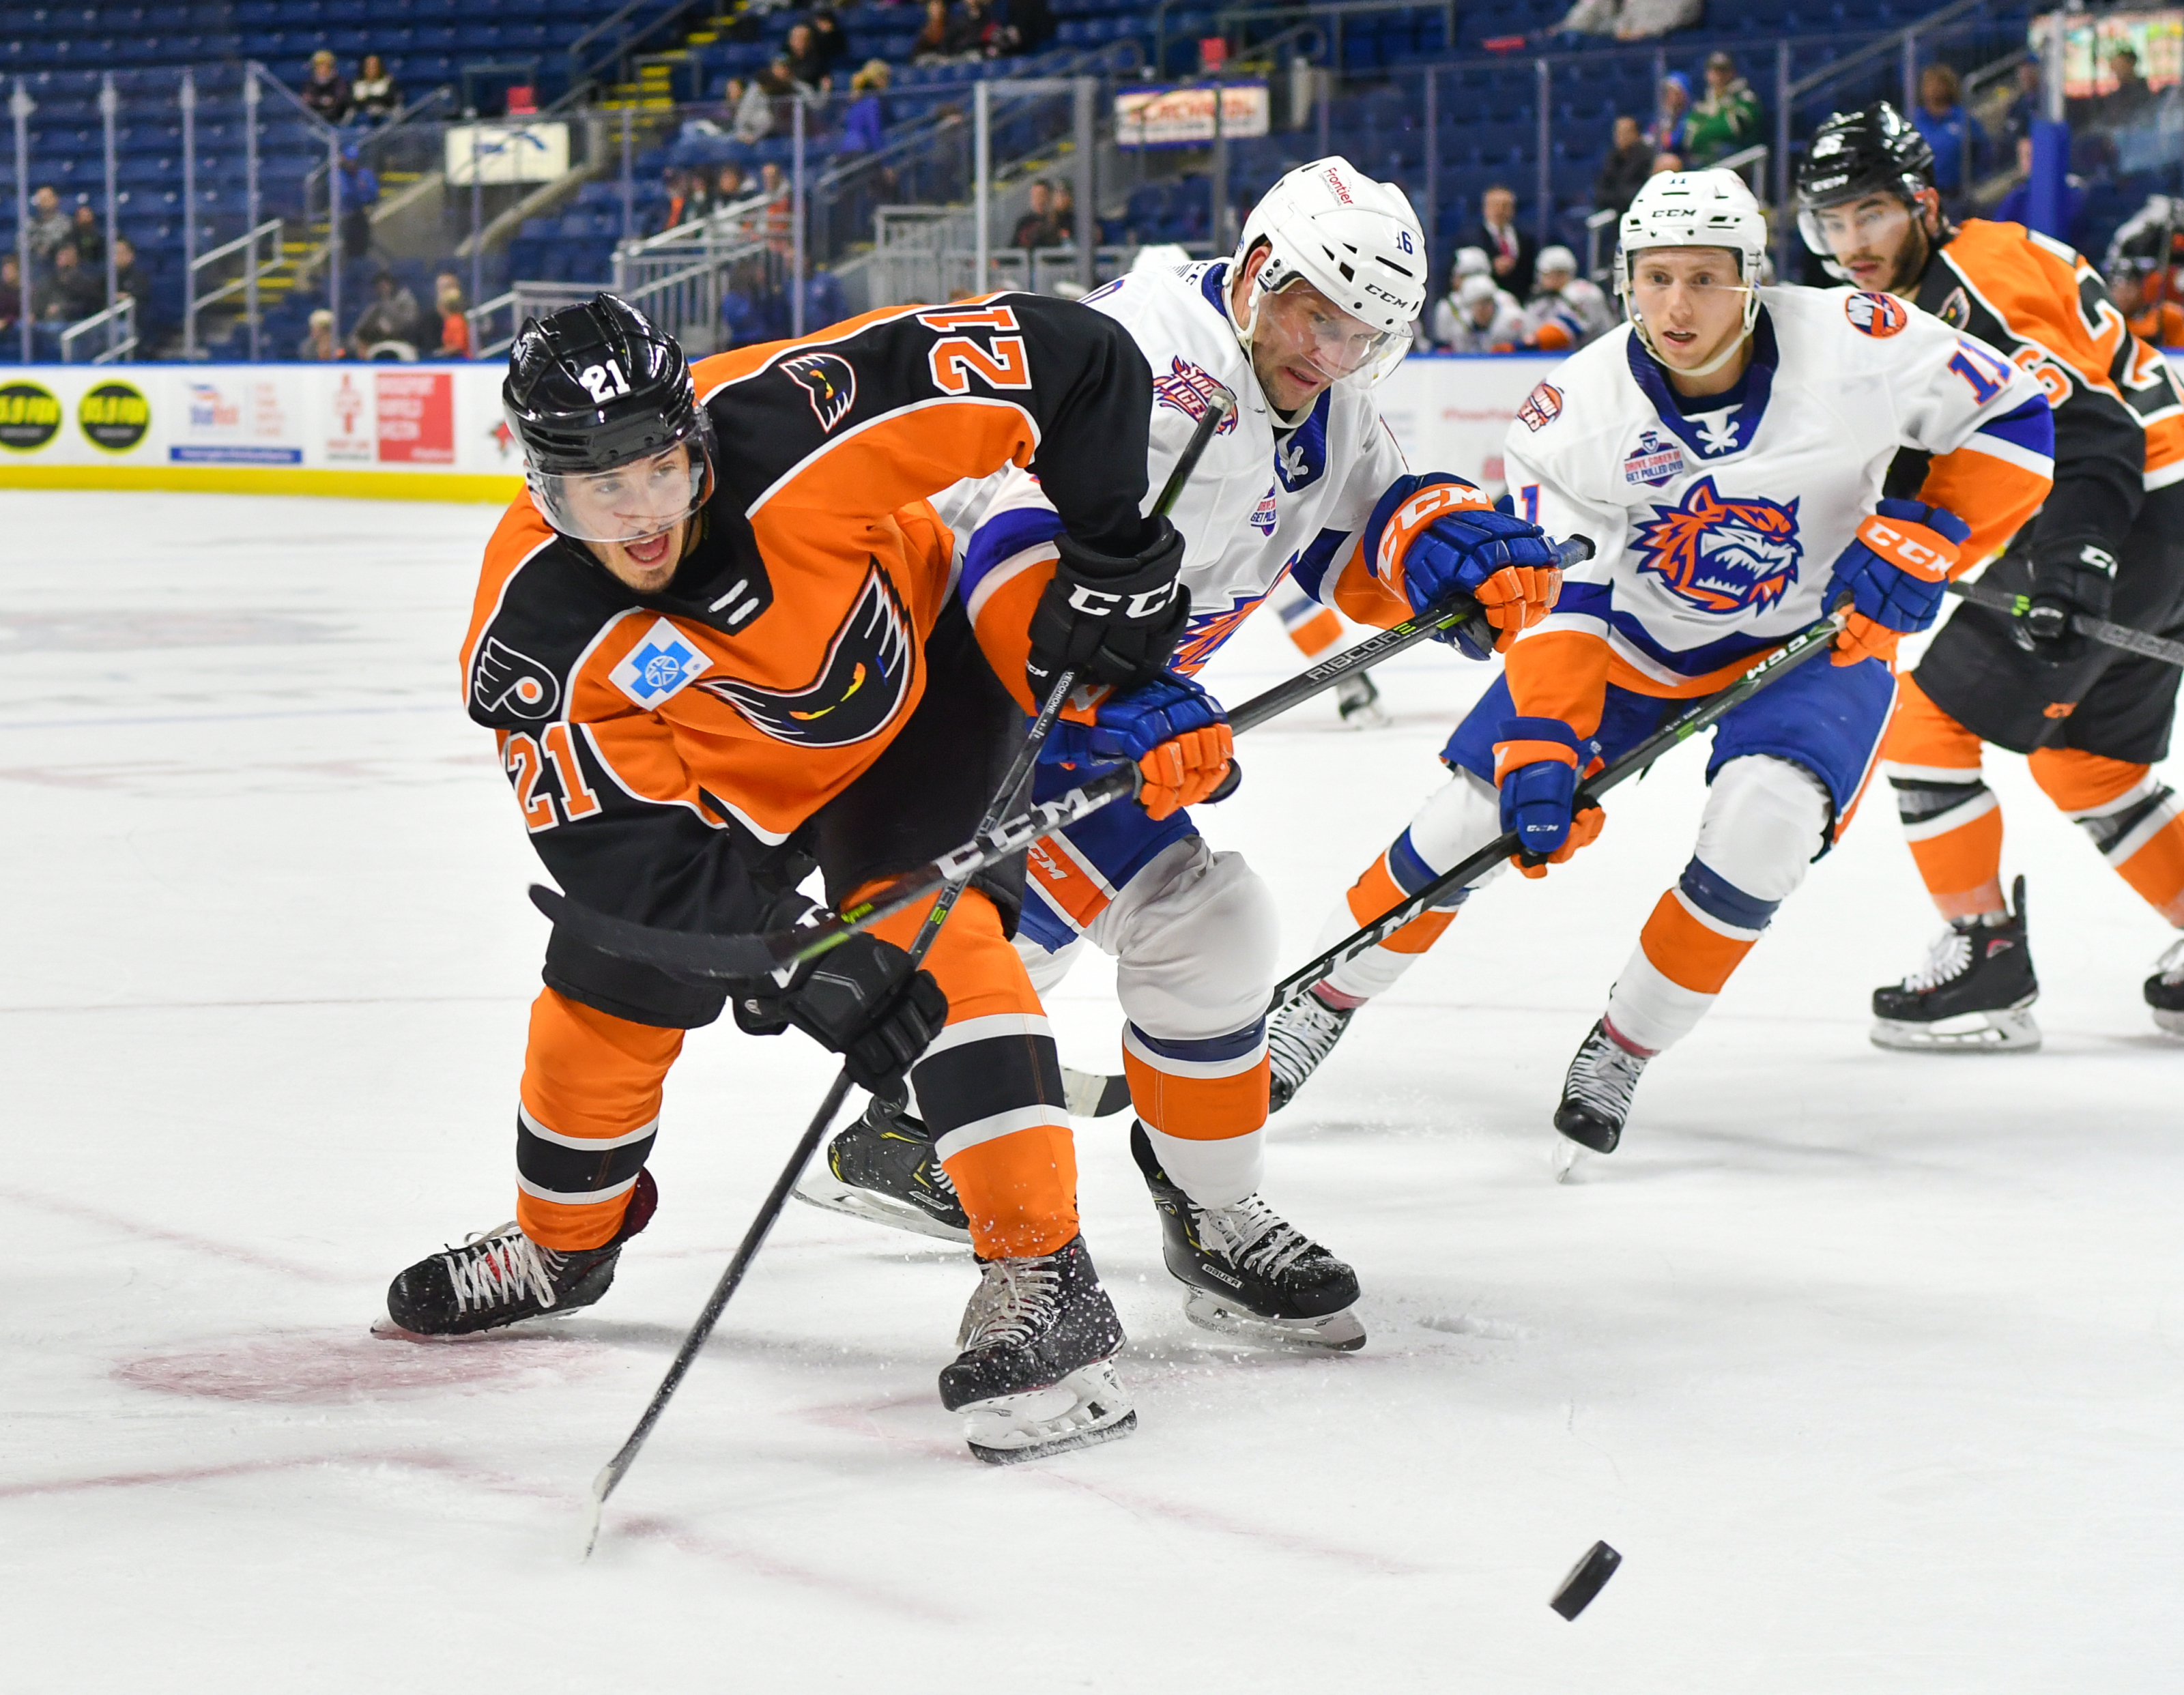 Lehigh Valley Phantoms - Empty netter for Syracuse and a